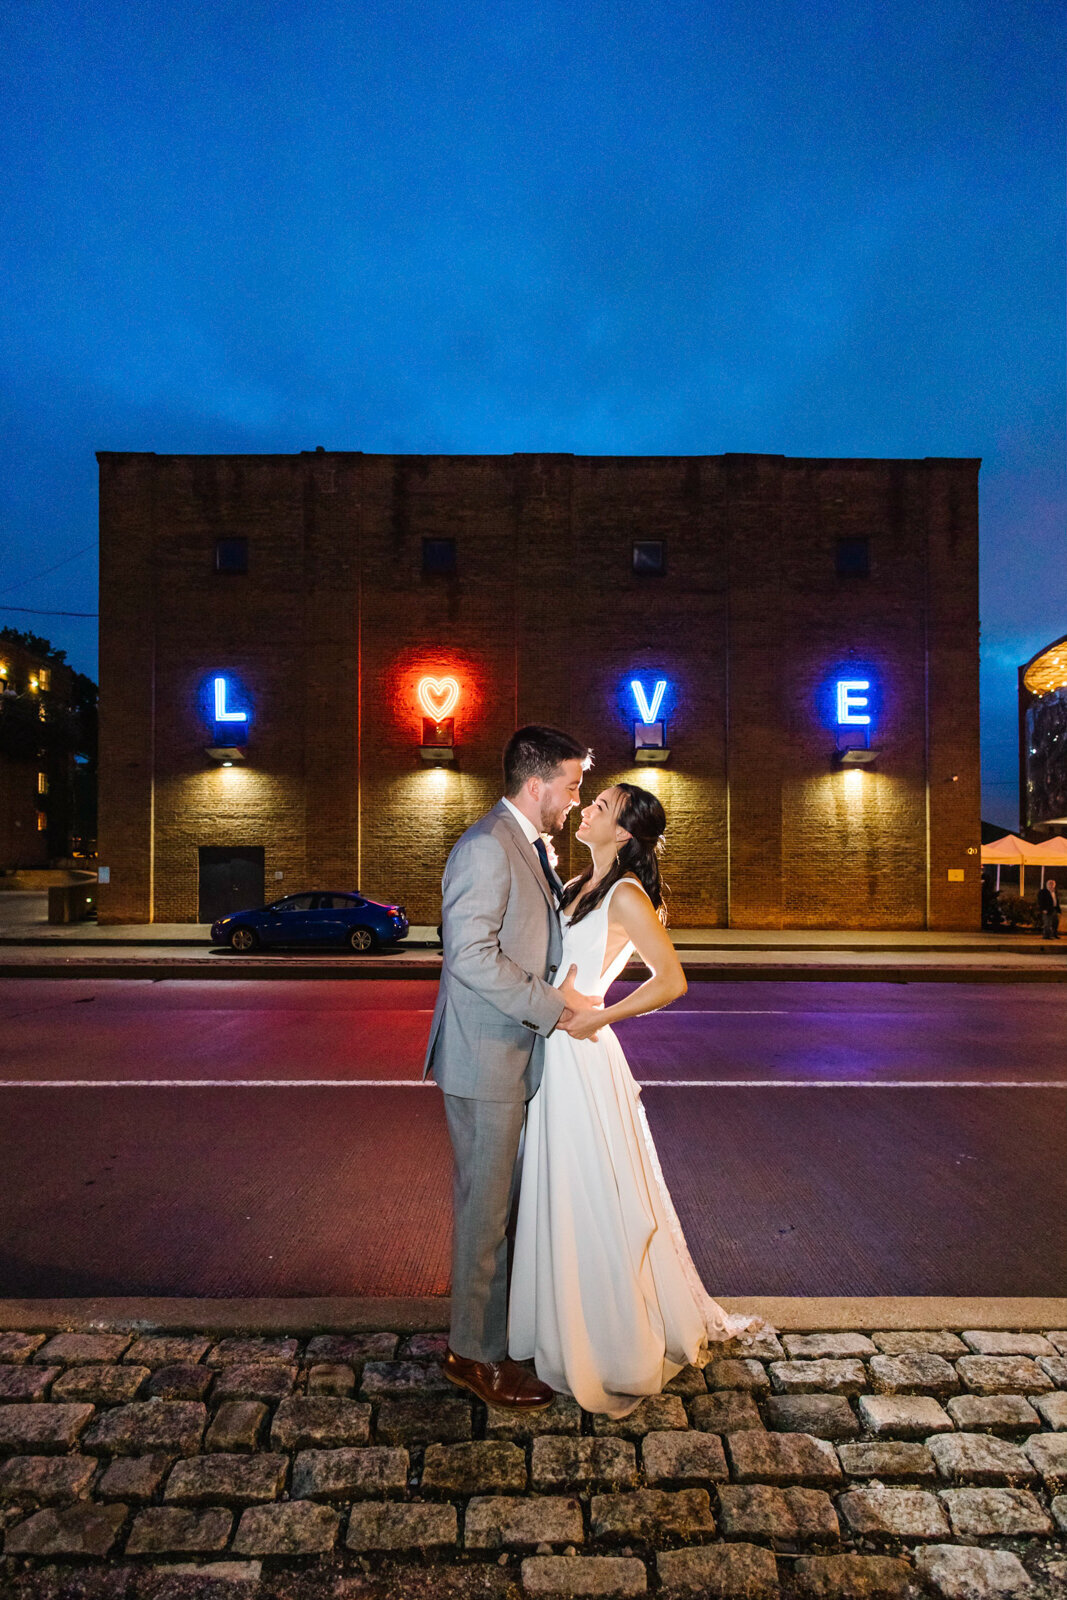 Visionary Art Museum Love sign with a bride and groom kissing